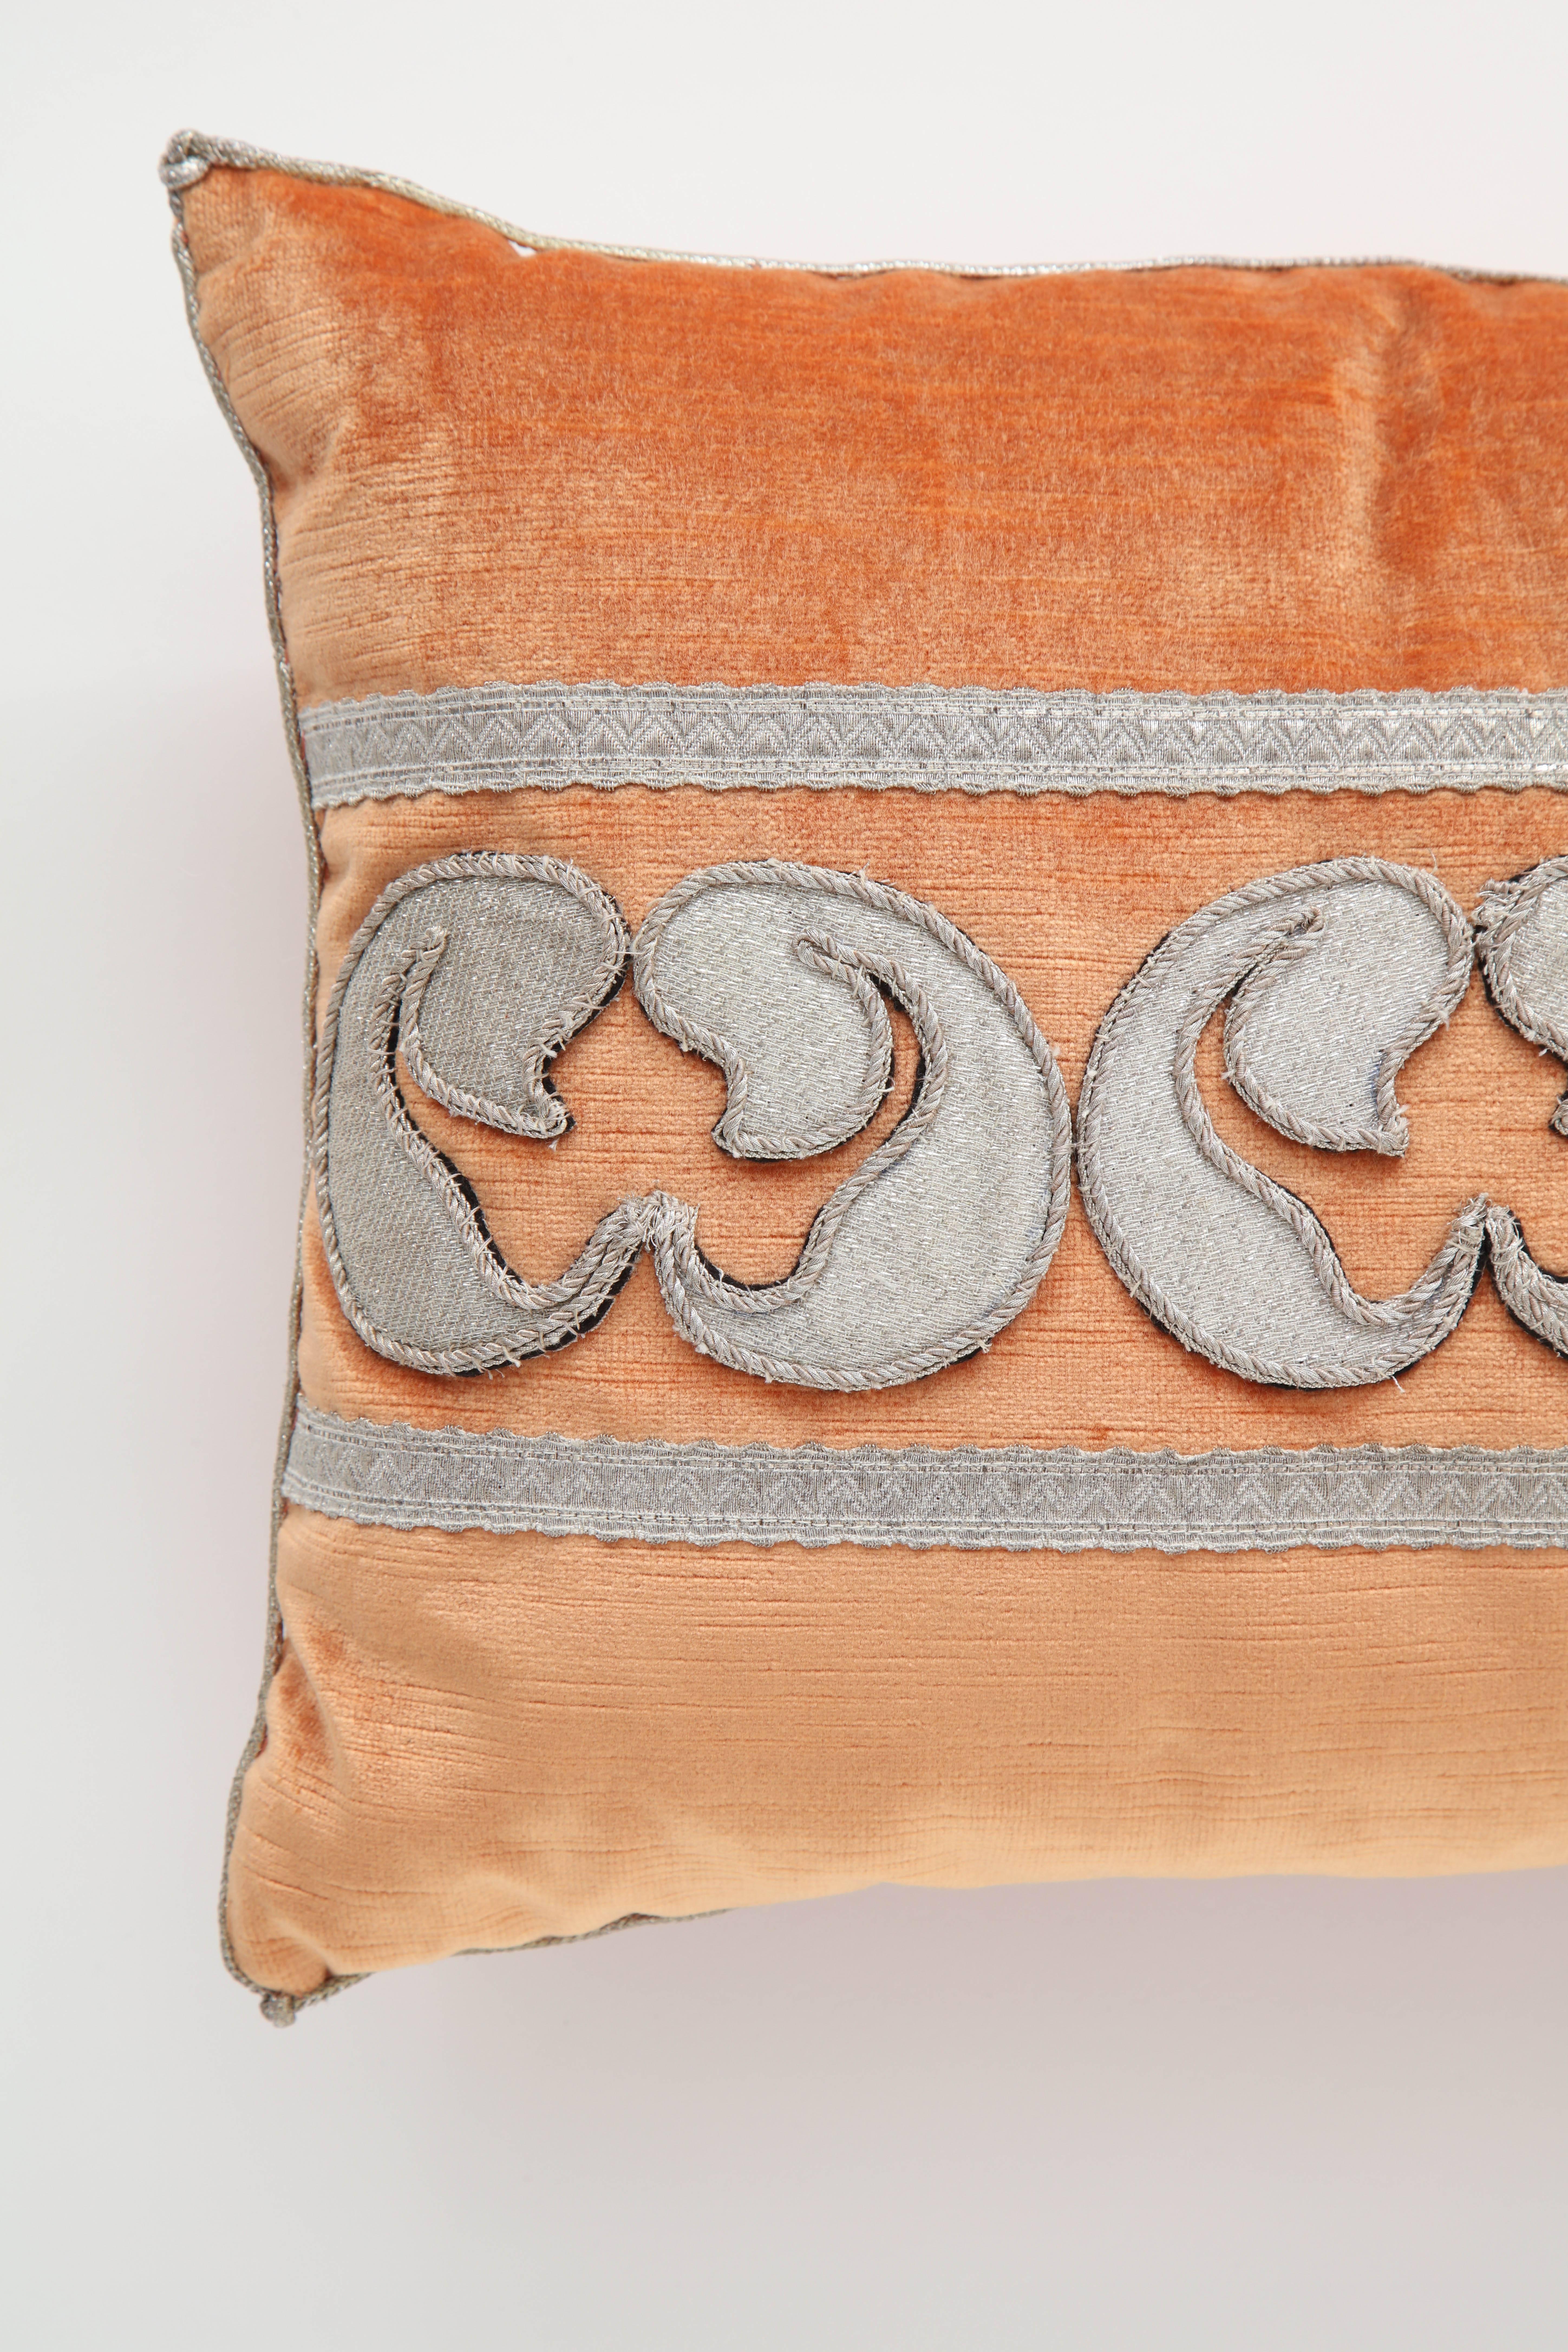 A stunning pillow in a tangerine velvet accented with antique metallic fragments forming a design between a border of antique metallic trim. Hand bordered in a metallic cording and down filled. Created by BViz Design.